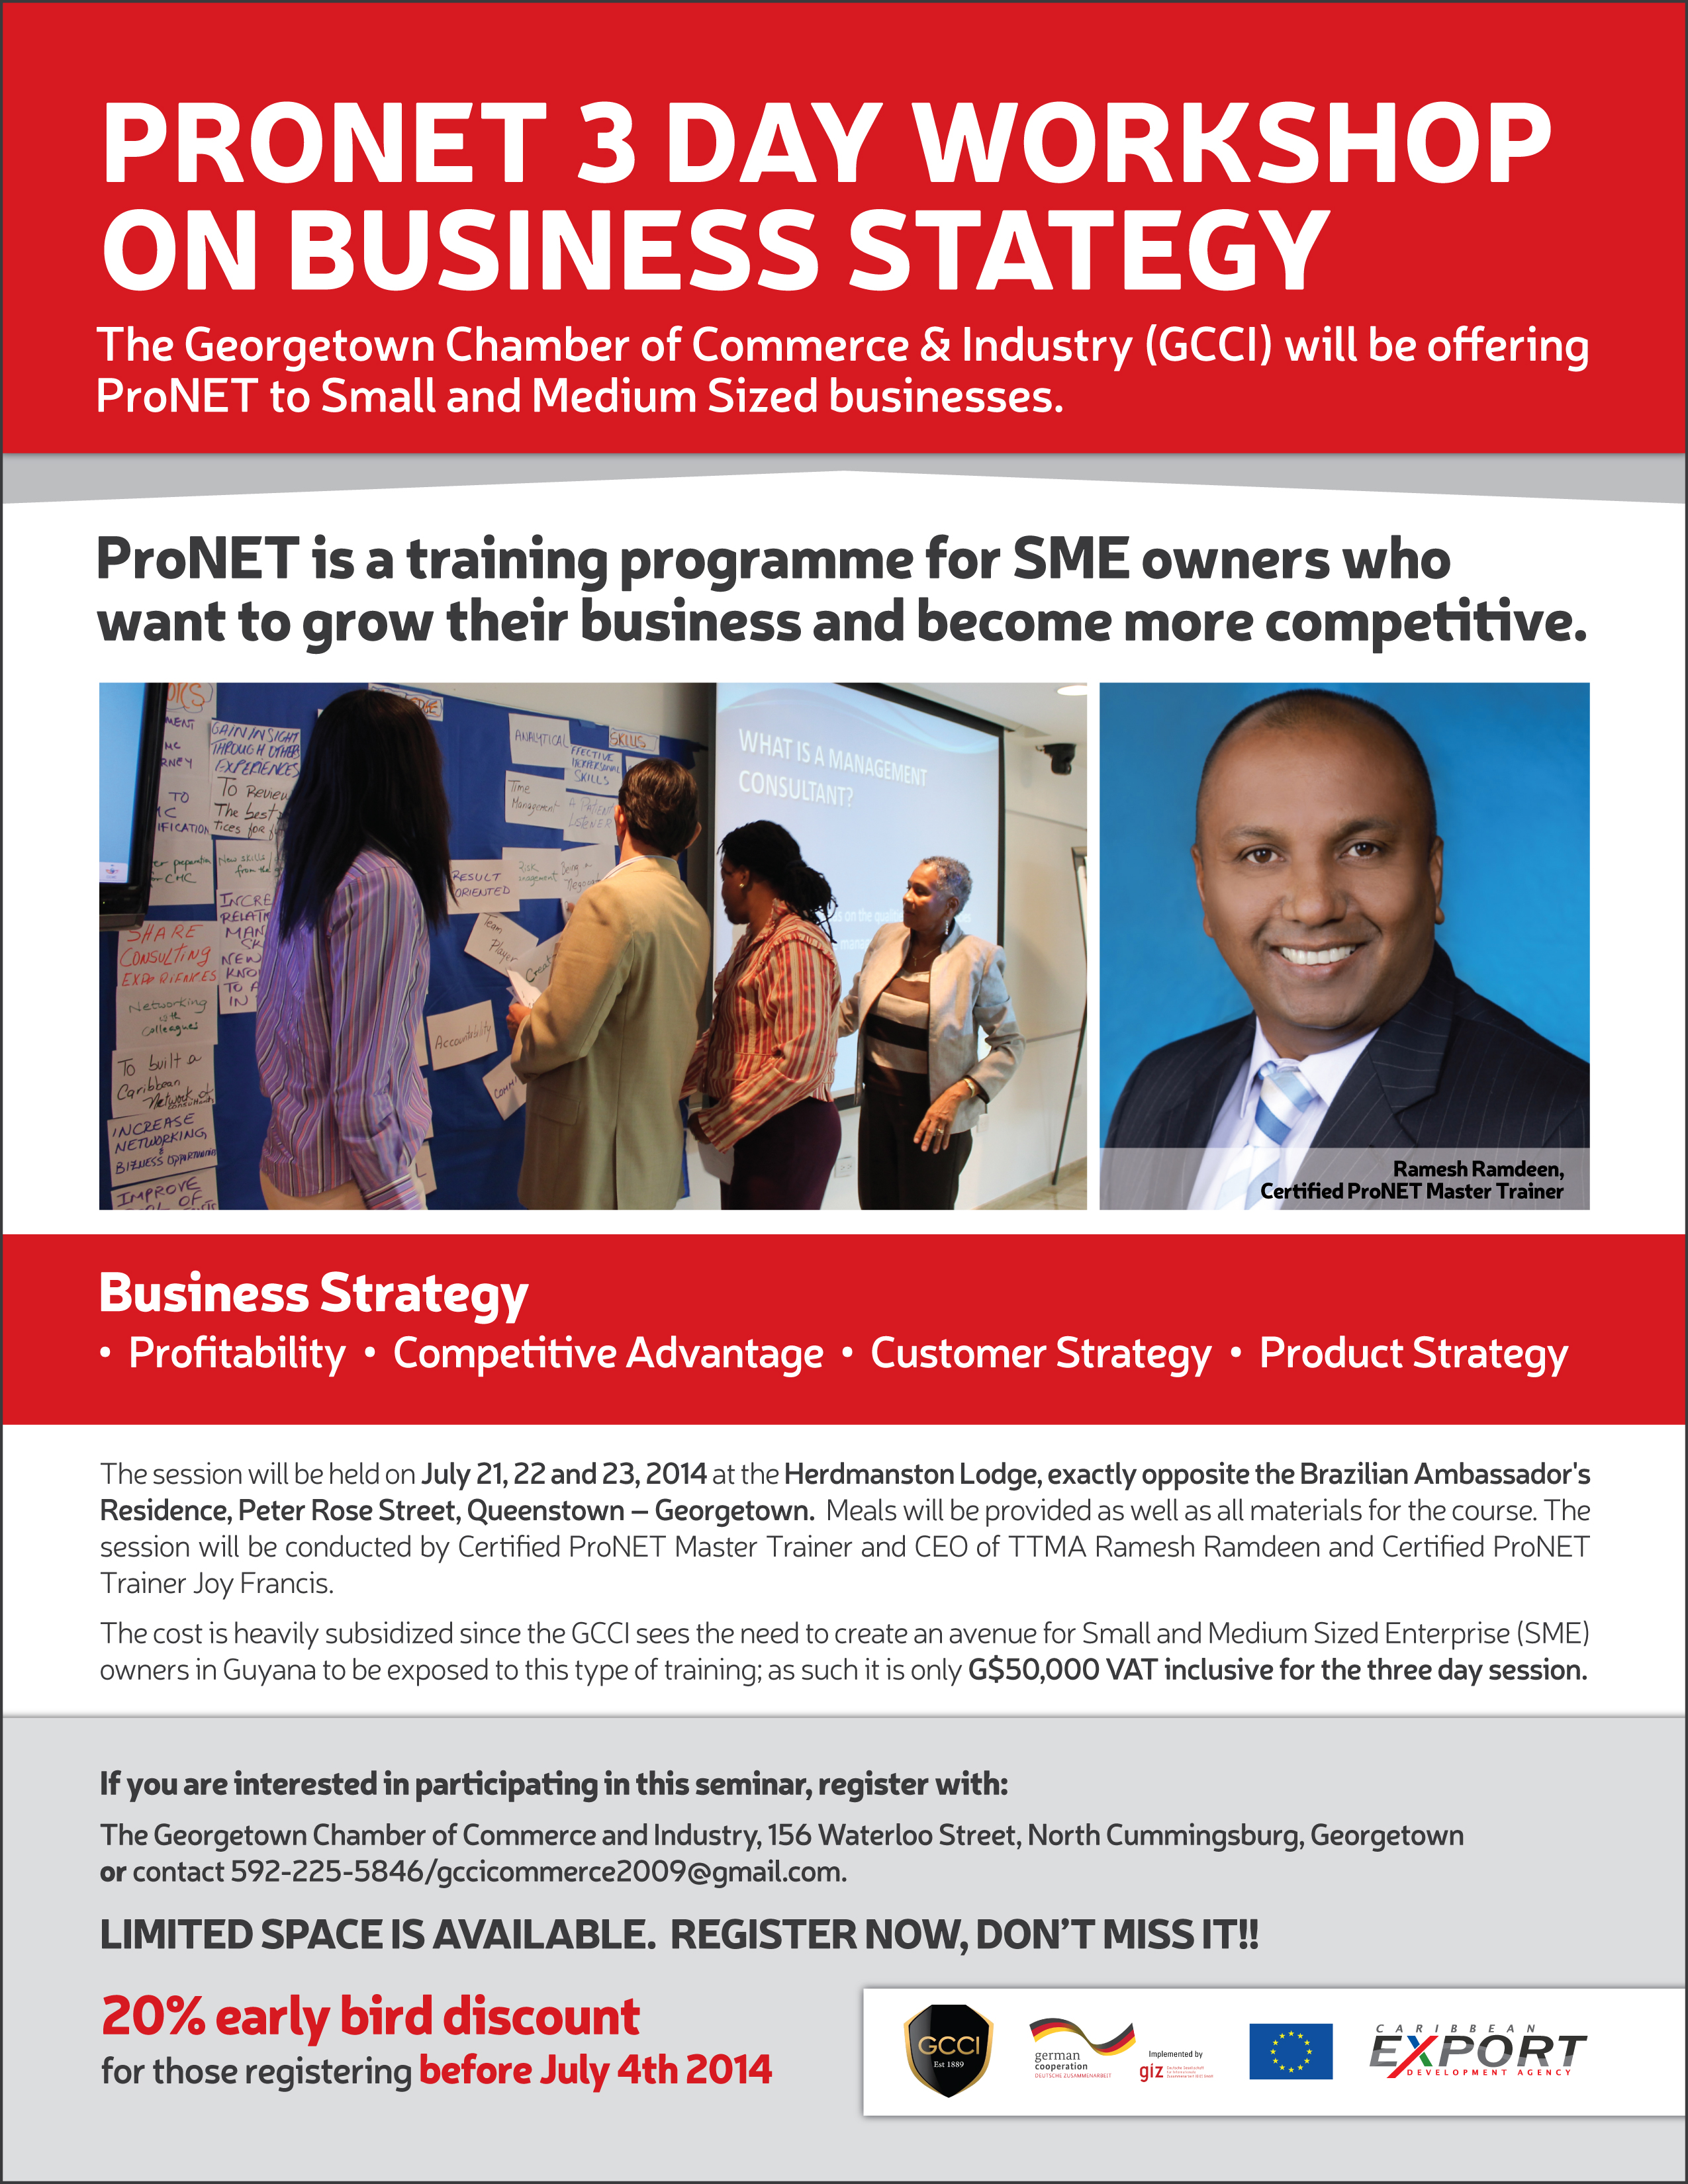 ProNET 3 Day Workshop on Business Strategy – July 21, 22 & 23, 2014